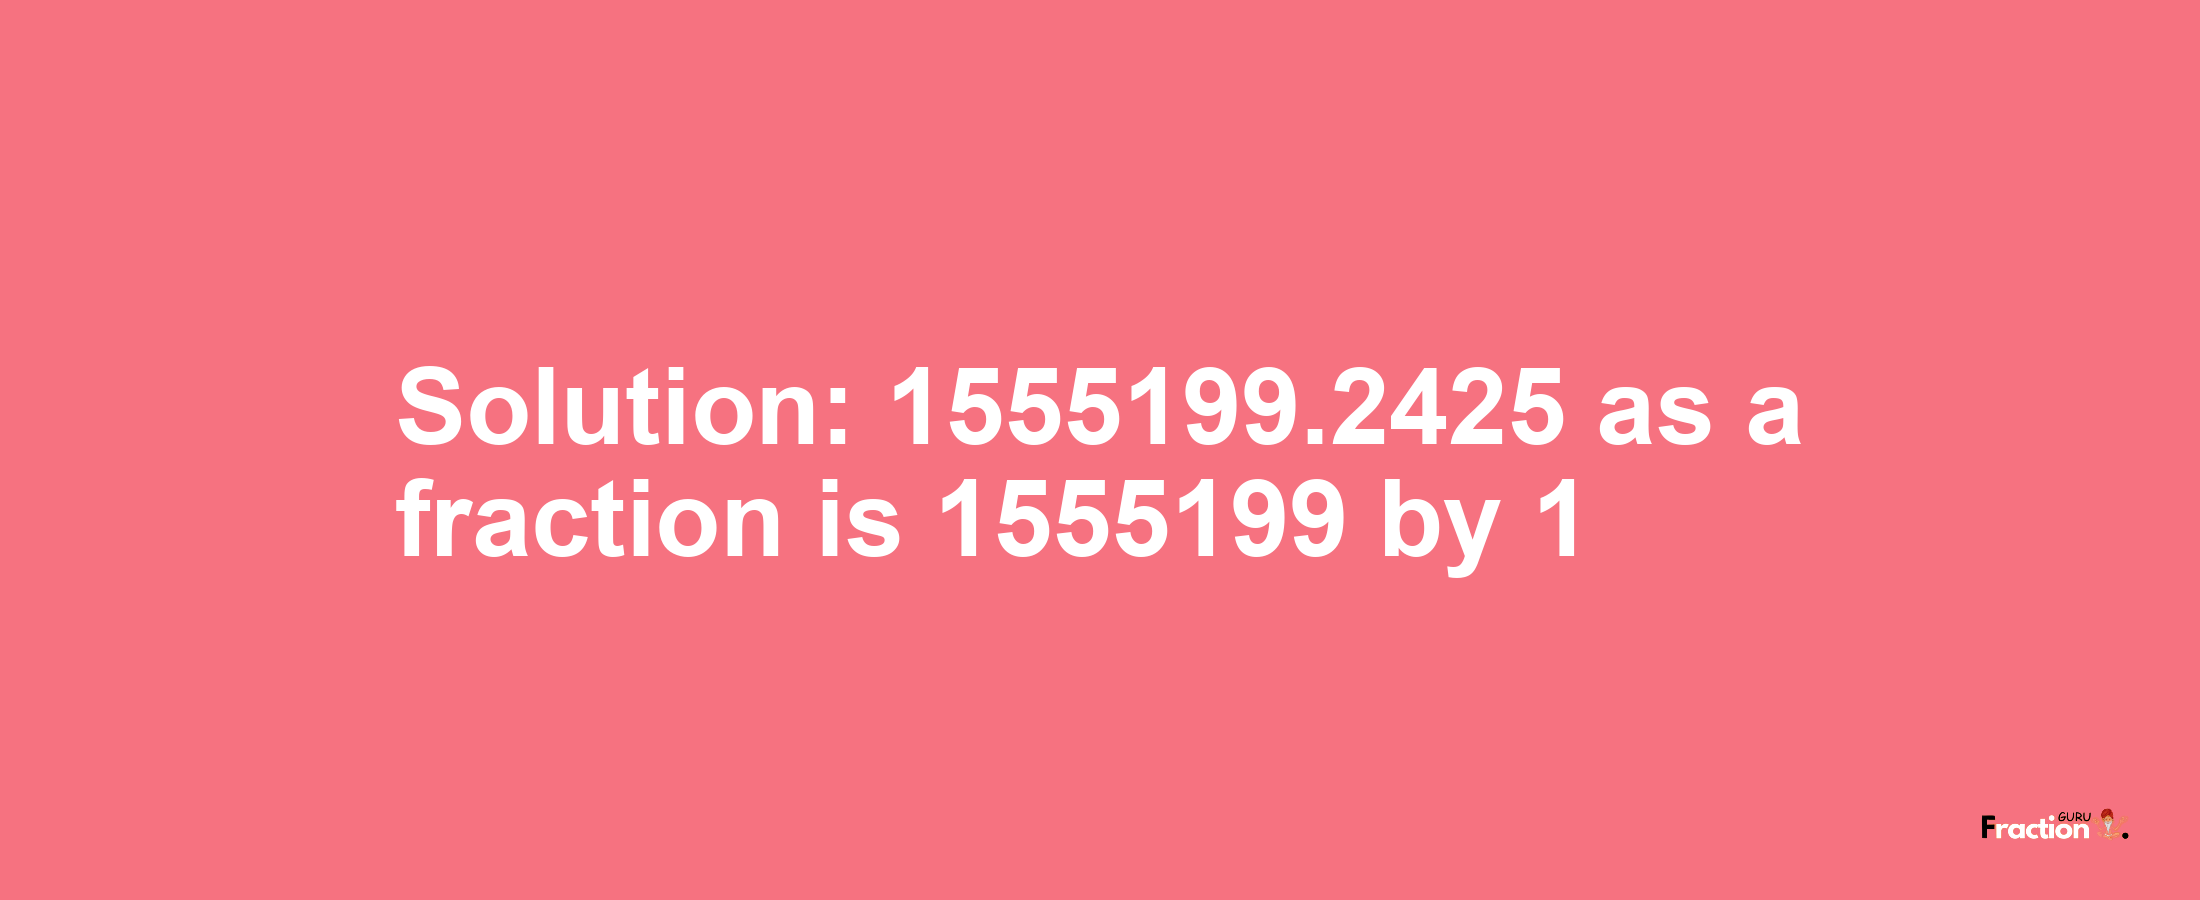 Solution:1555199.2425 as a fraction is 1555199/1